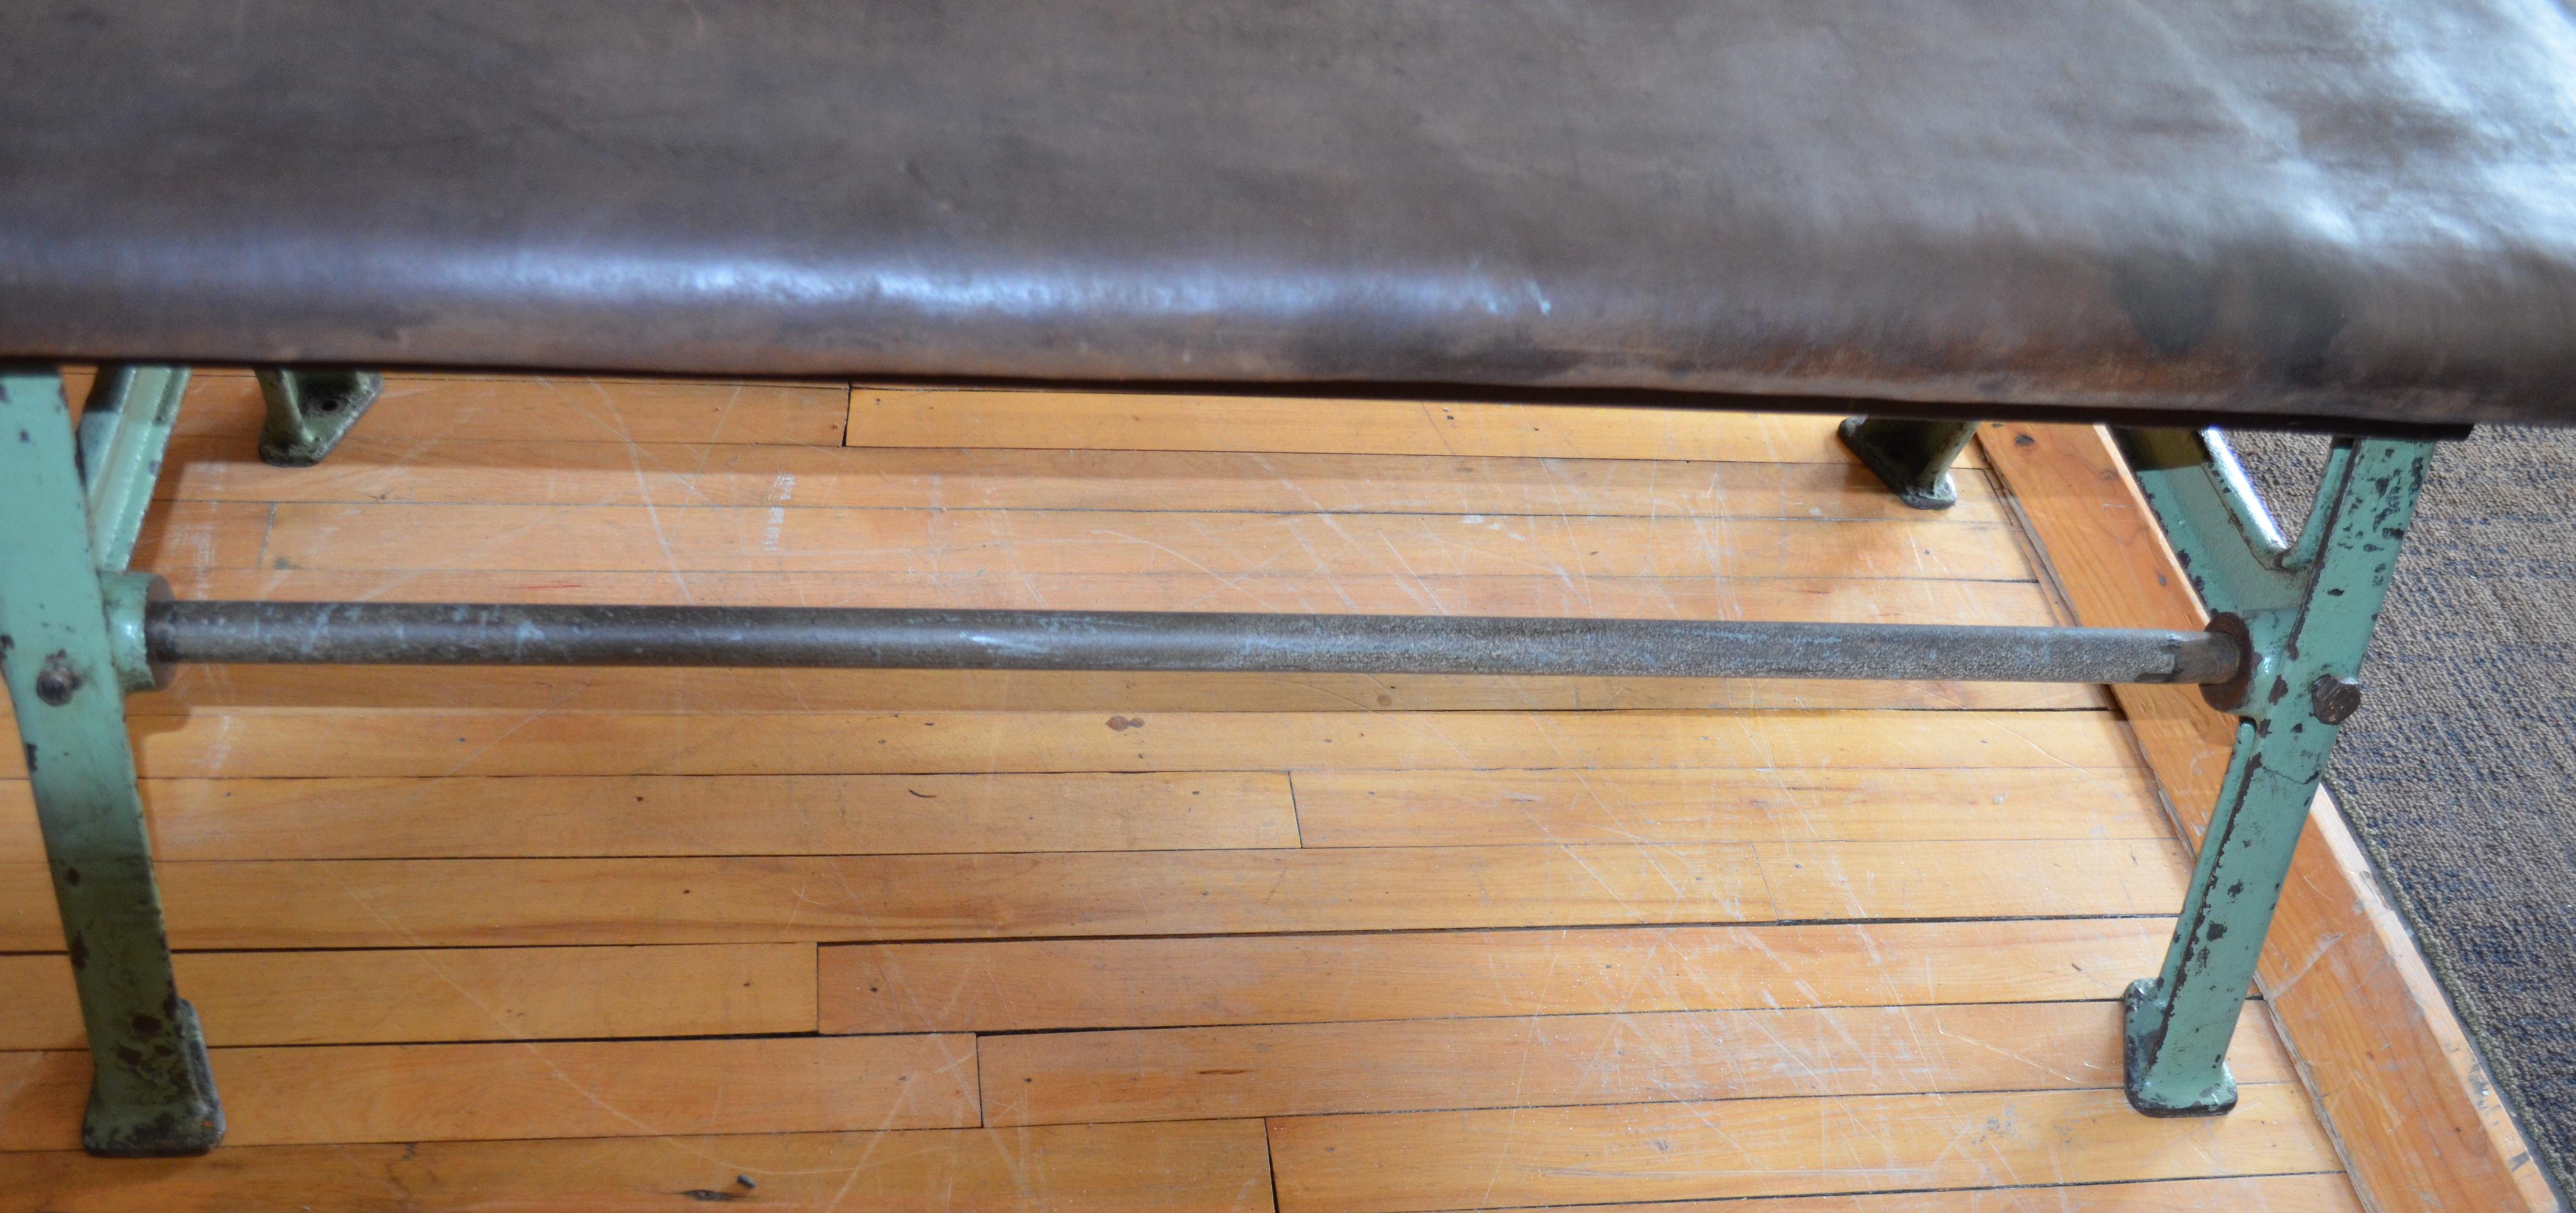 Bench of Suede Leather with Industrial Forged Iron Base, Early 20th Century For Sale 1